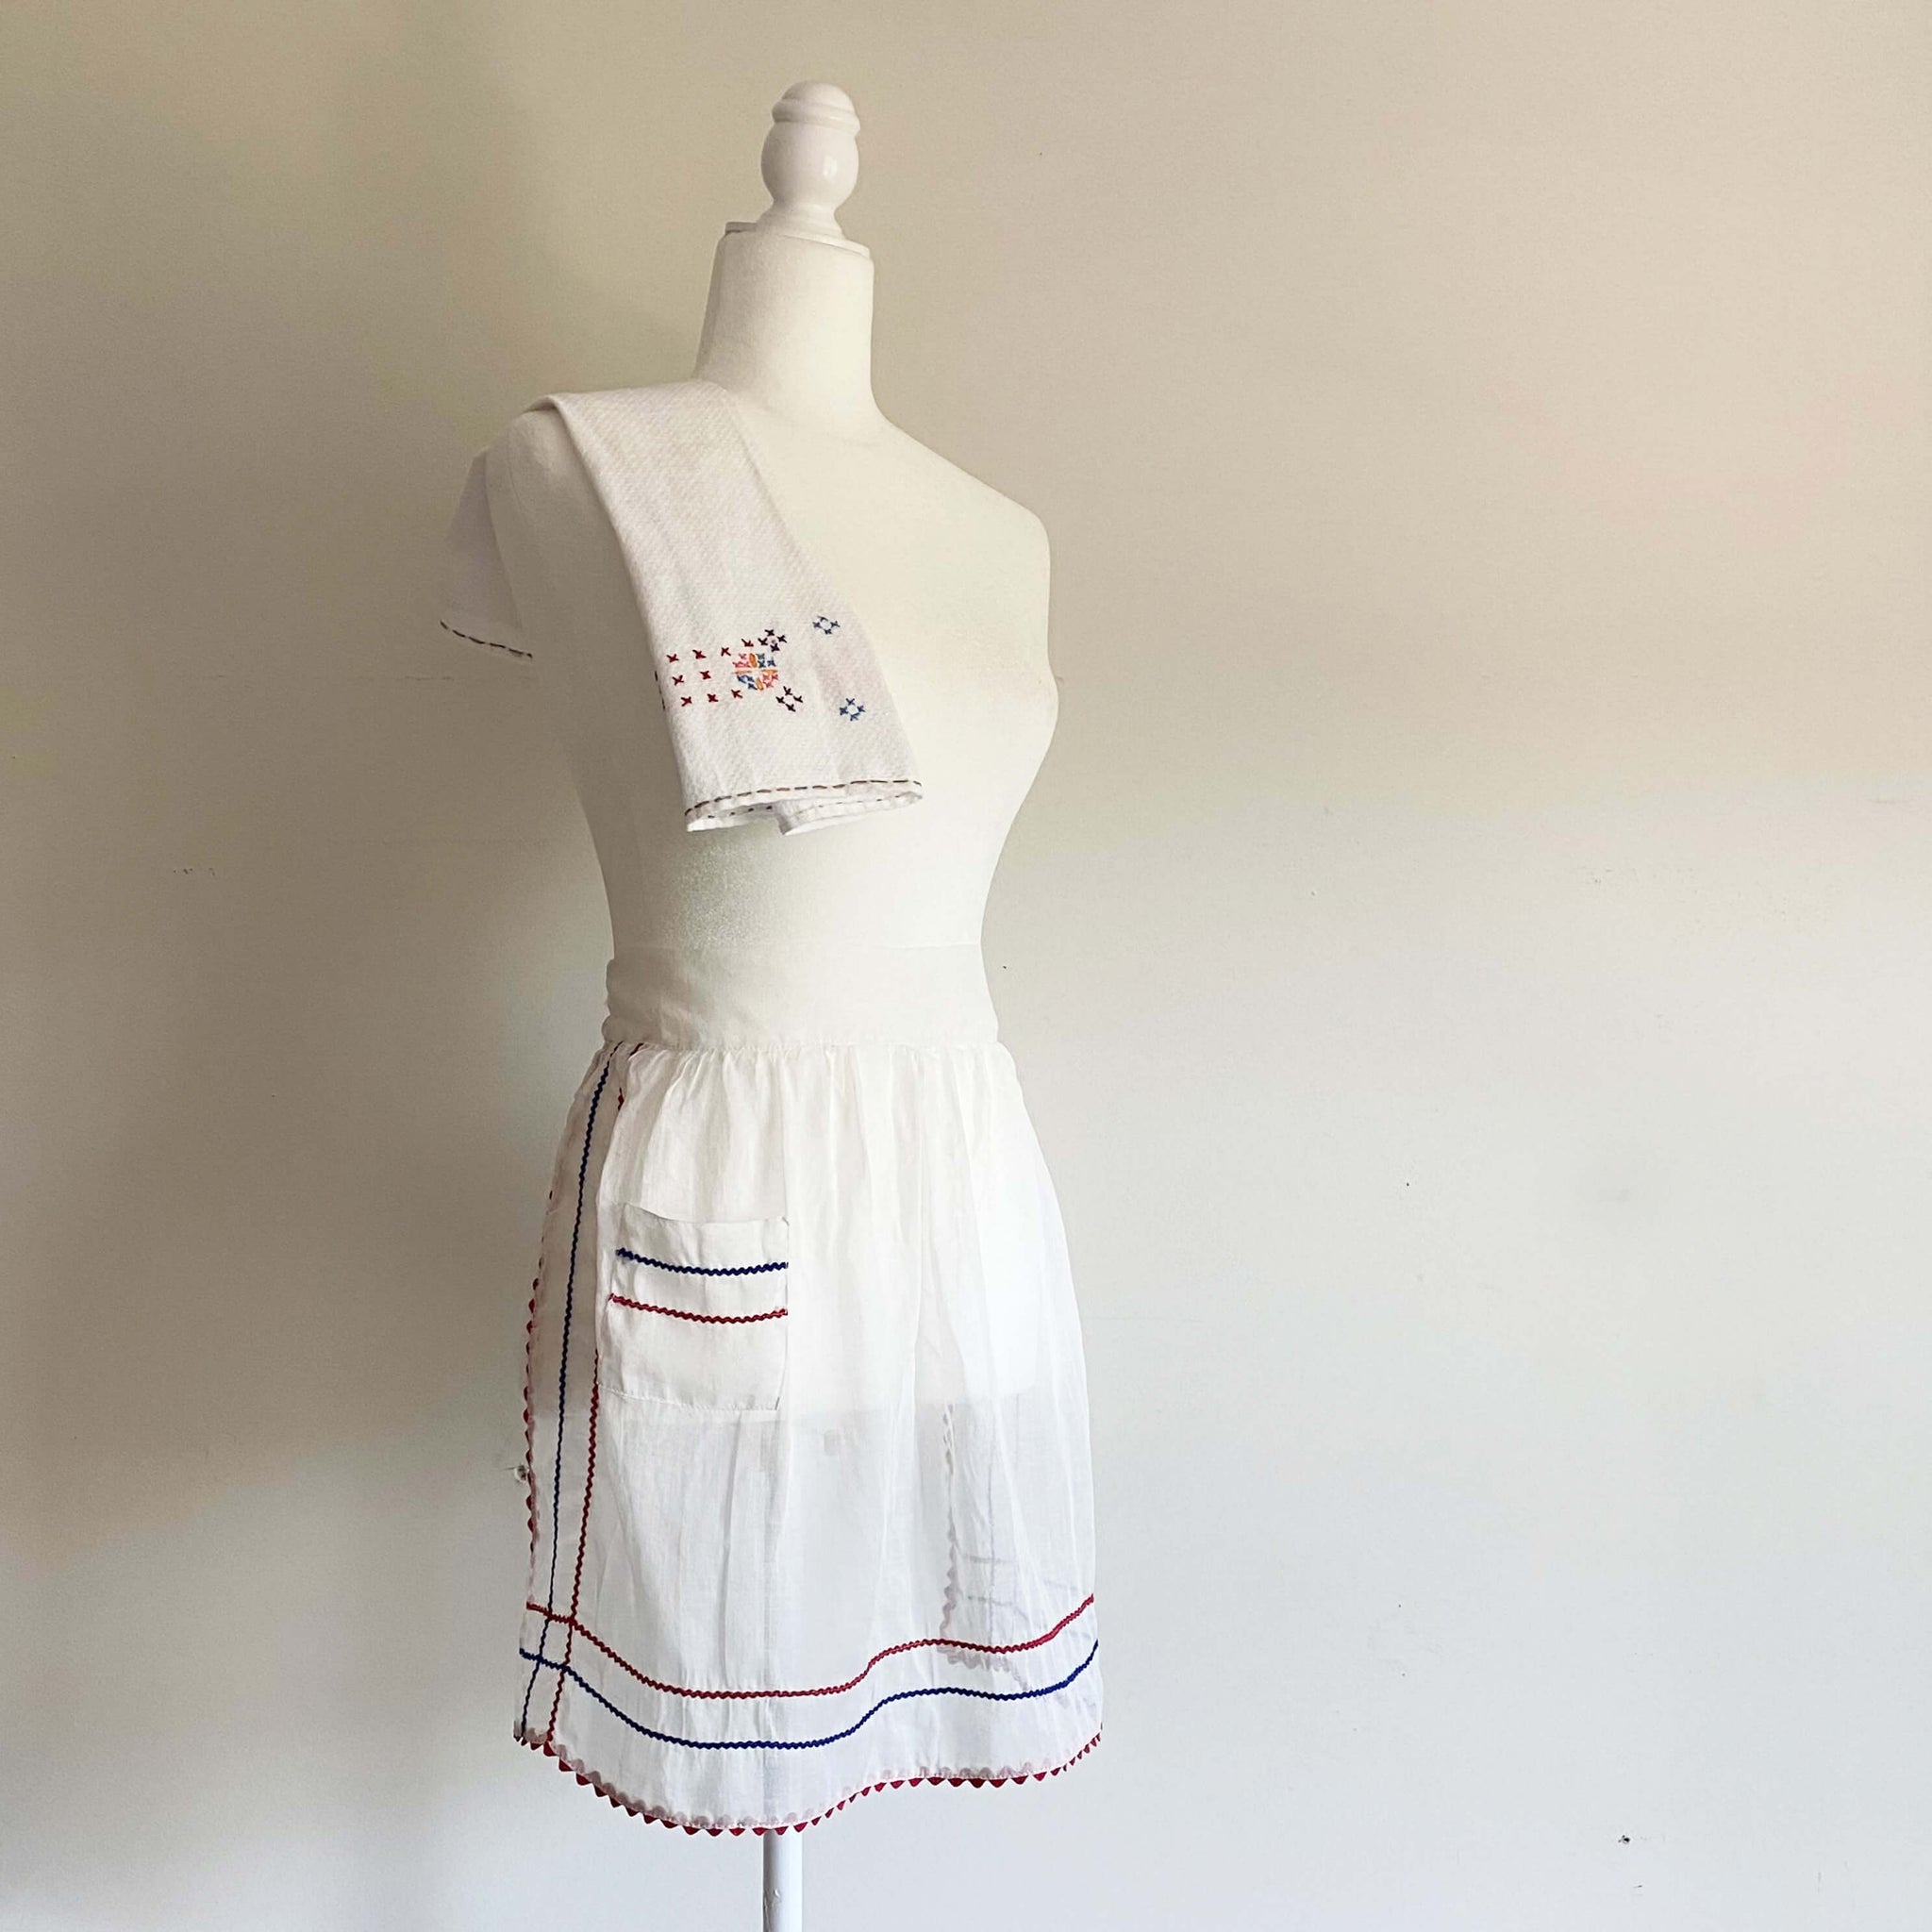 Vintage Sheer Half Apron with Red and Blue Ric Rac Stripes circa 1940s